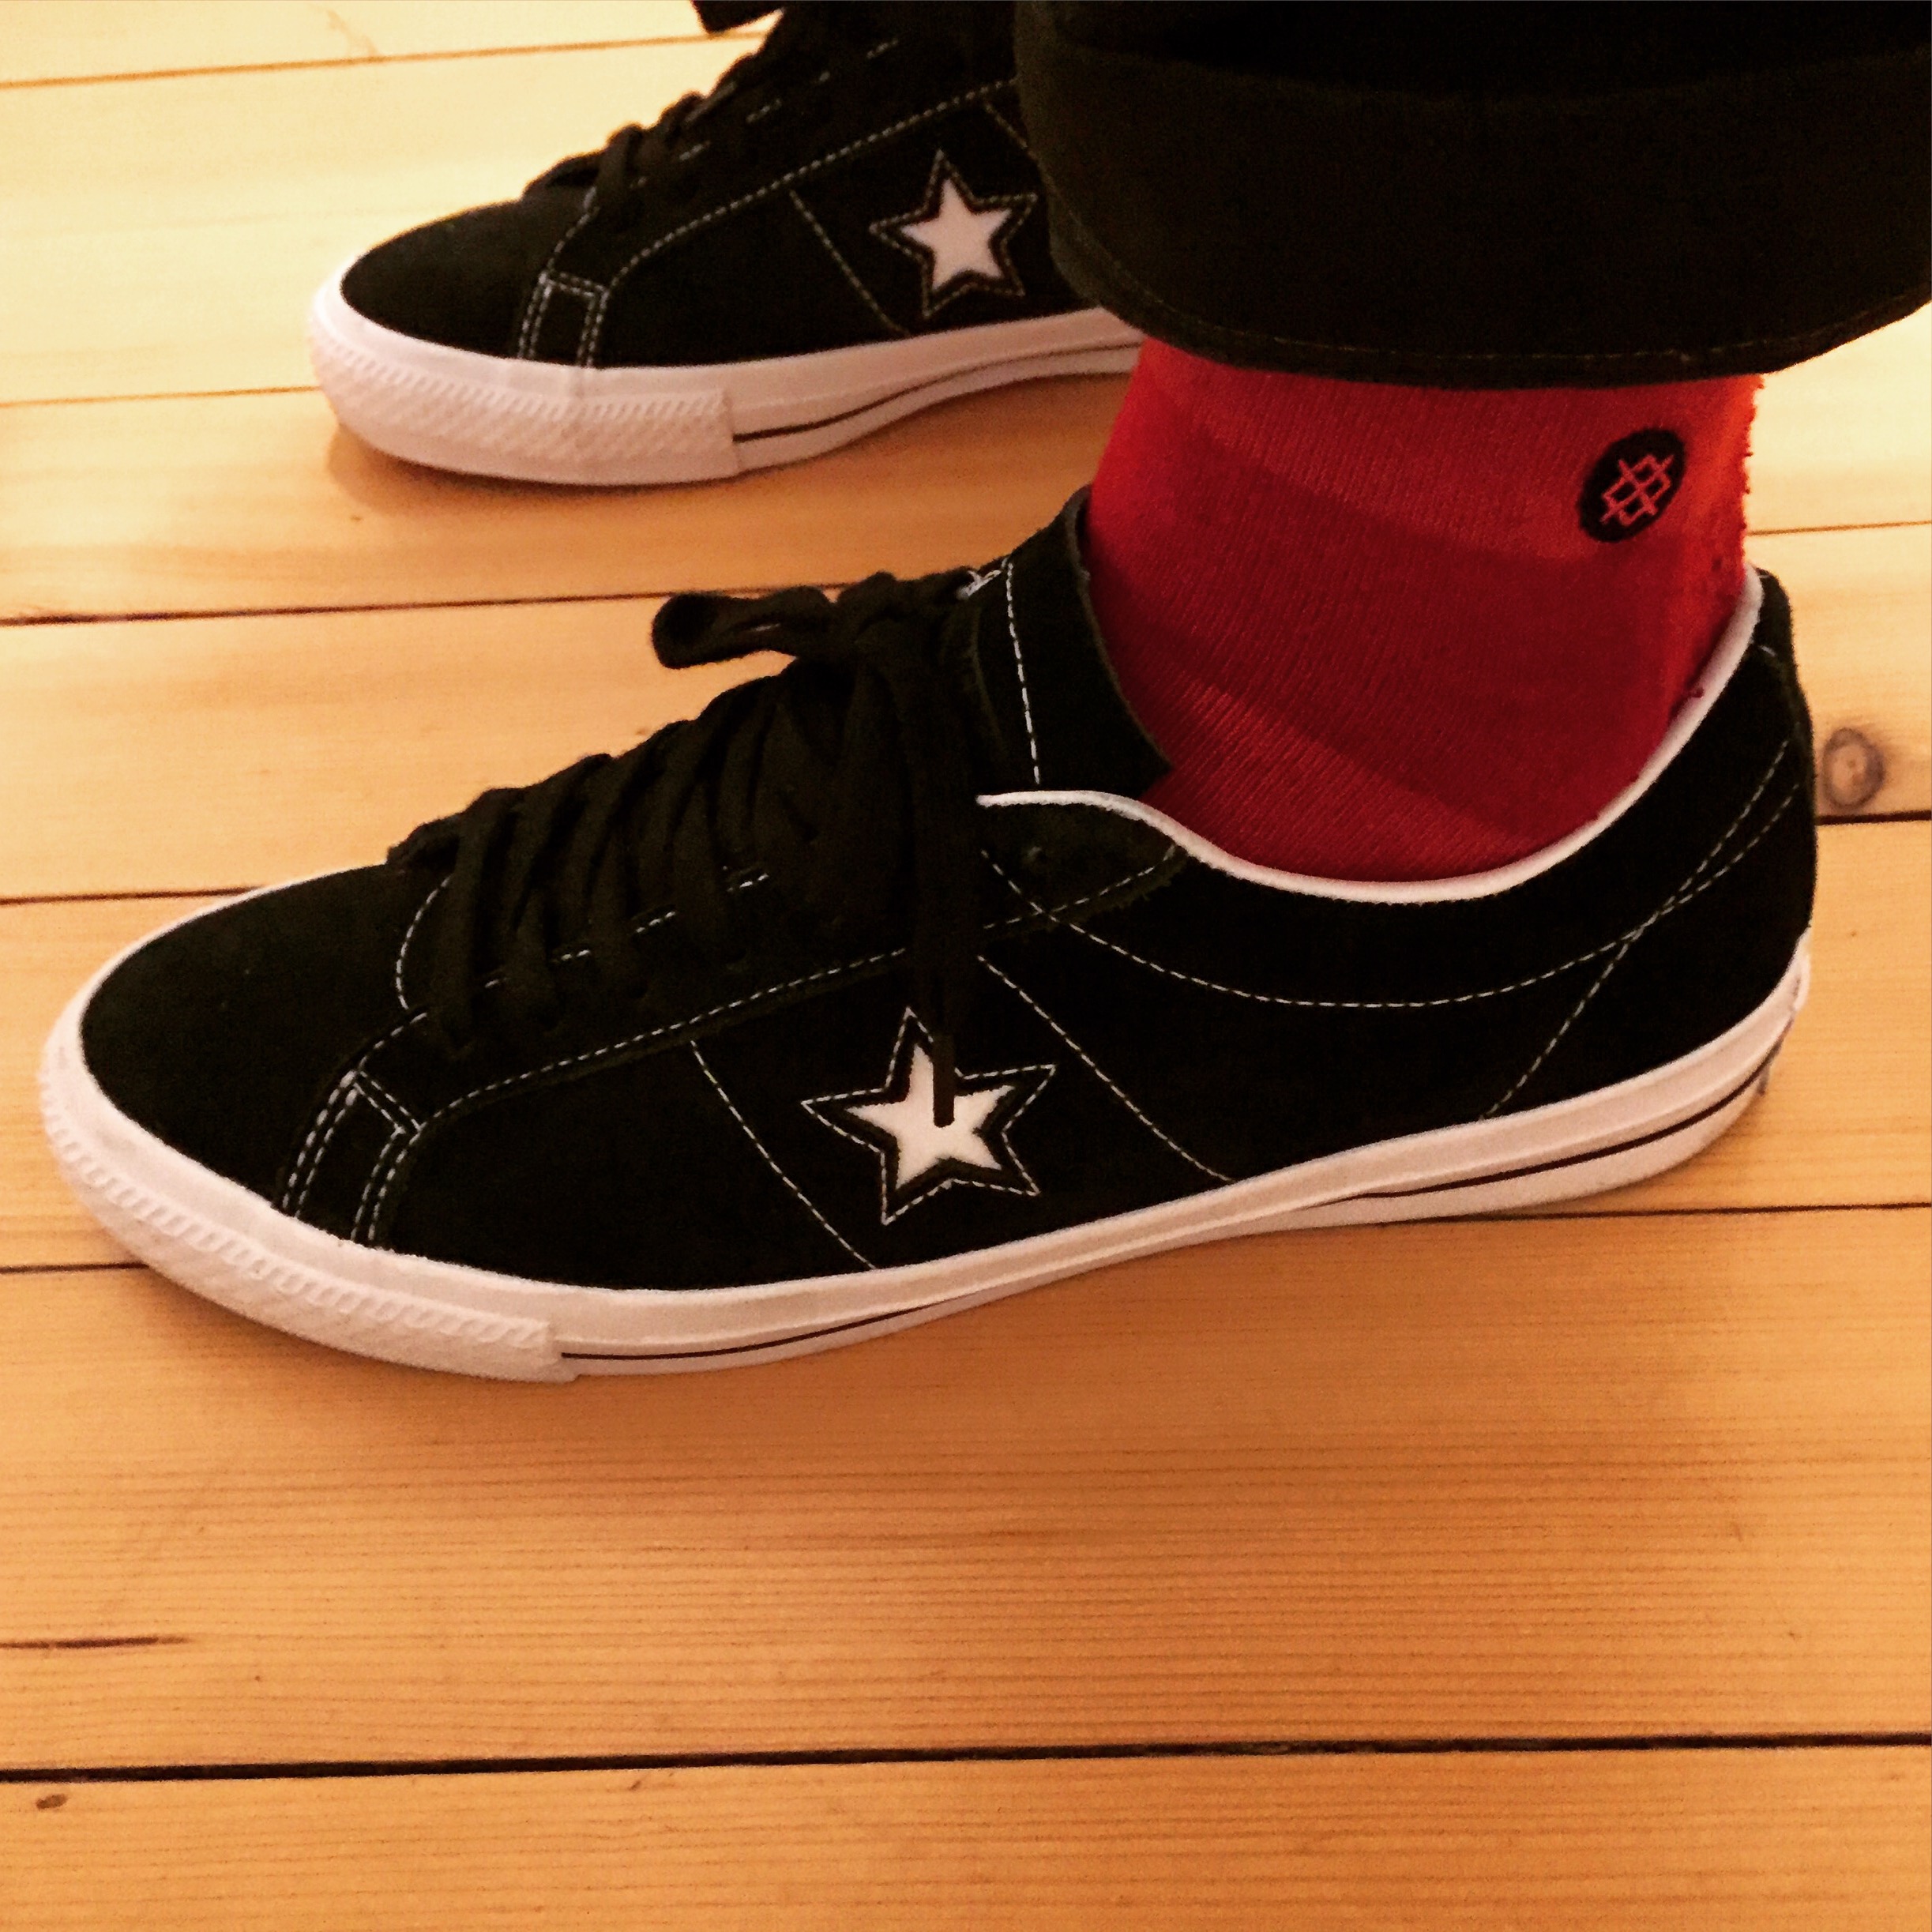 Converse Cons One Star - Weartested - detailed skate shoe reviews